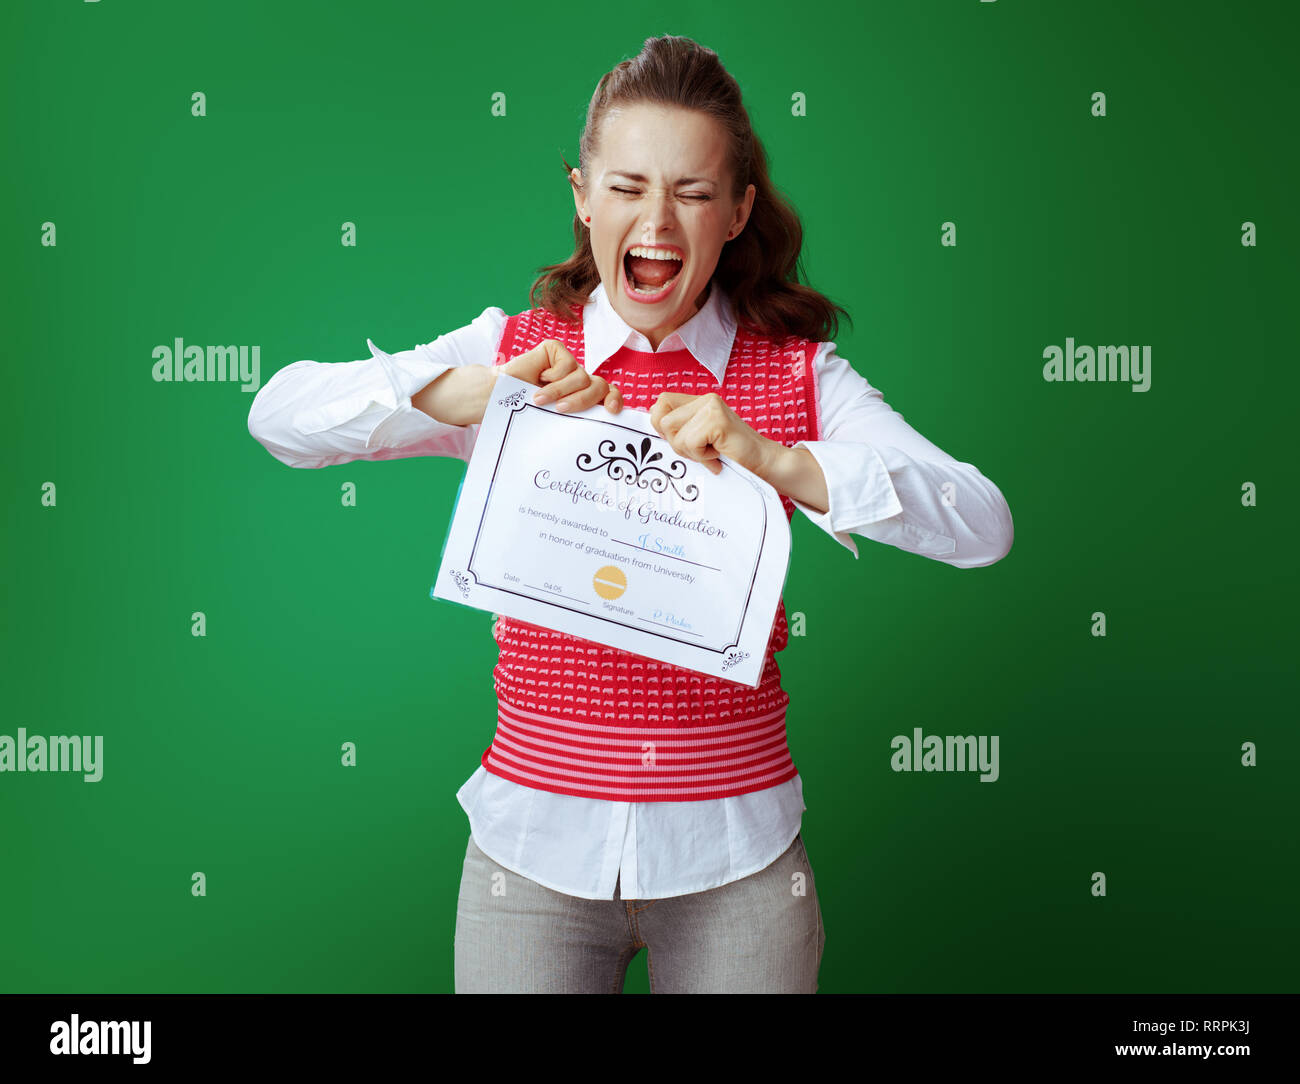 annoyed fit student woman in grey jeans and pink sleeveless shirt tearing Certificate of Graduation isolated on chalkboard green. Useless degree. Educ Stock Photo